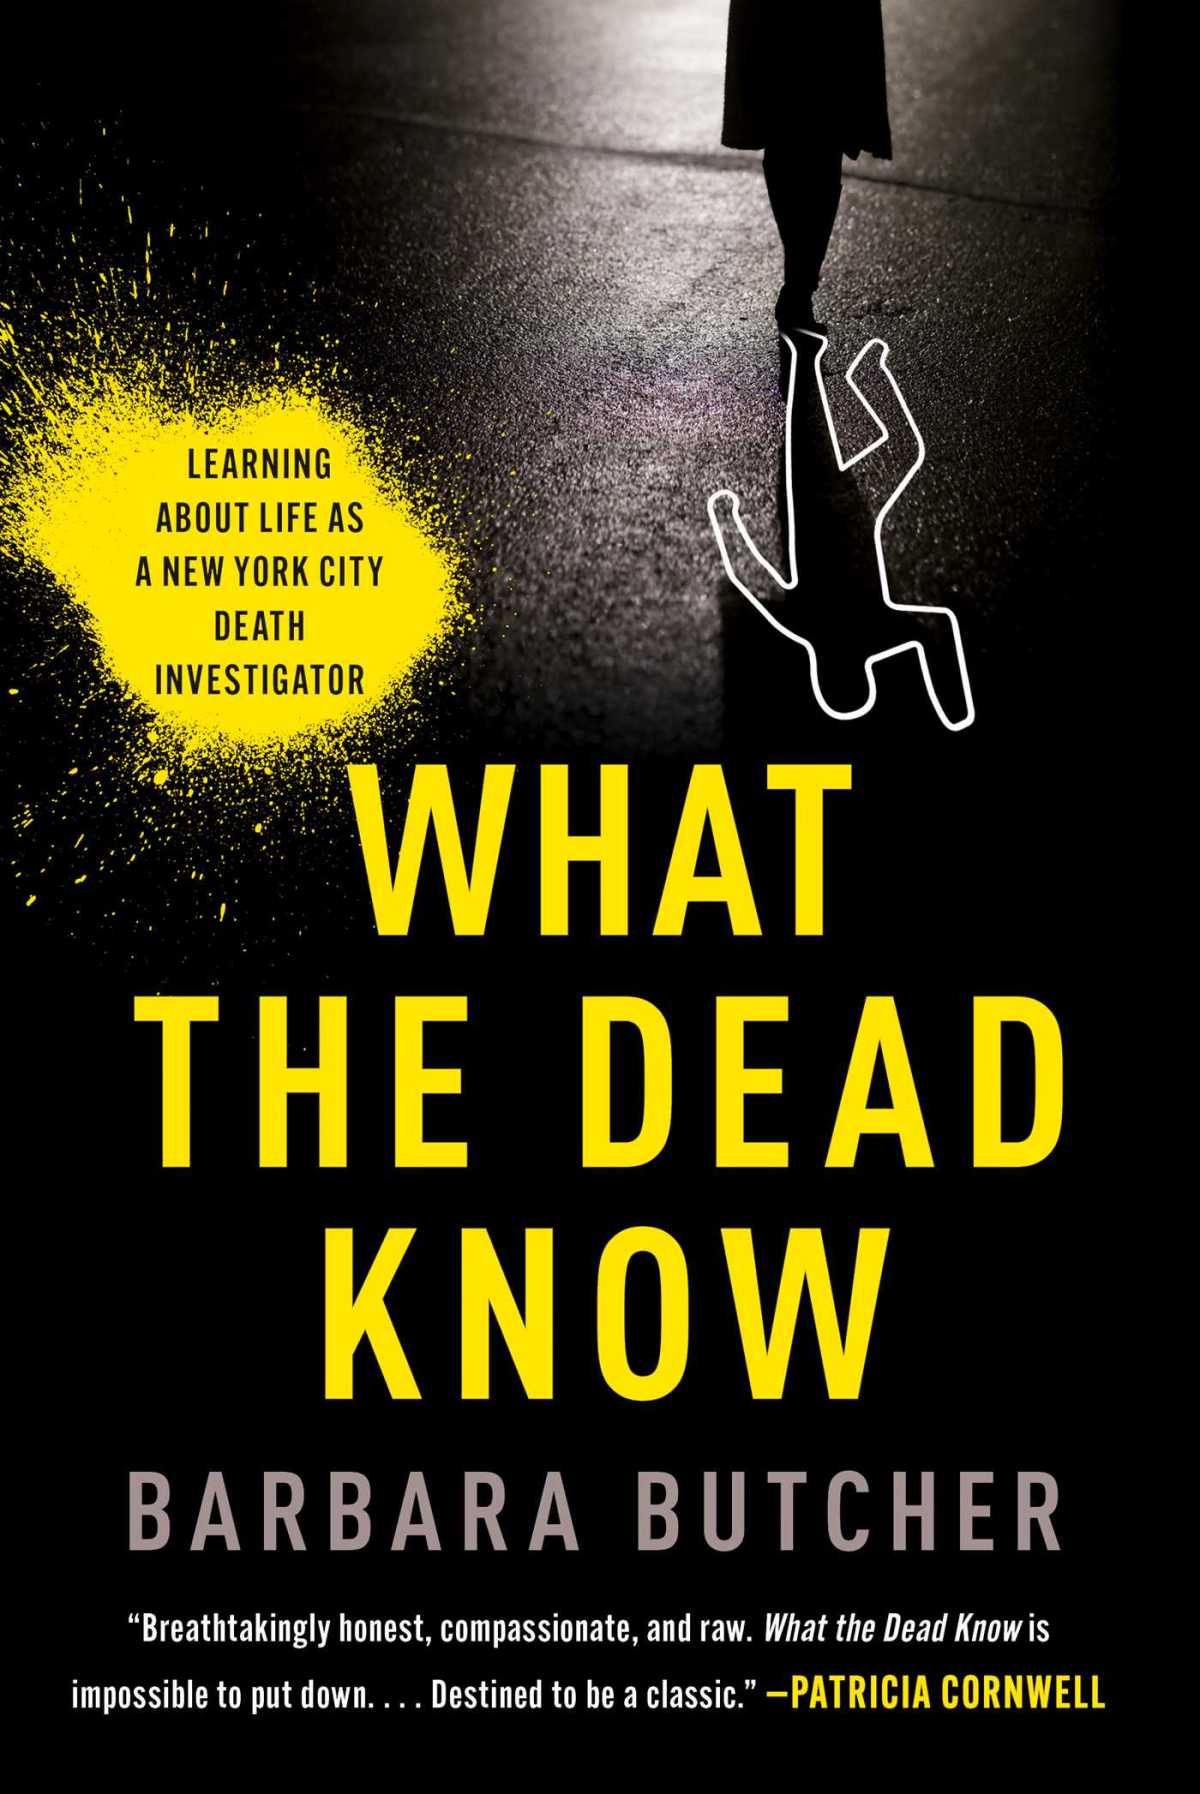 ‘What the Dead Know’ a Pensive Look Back at Life and Death